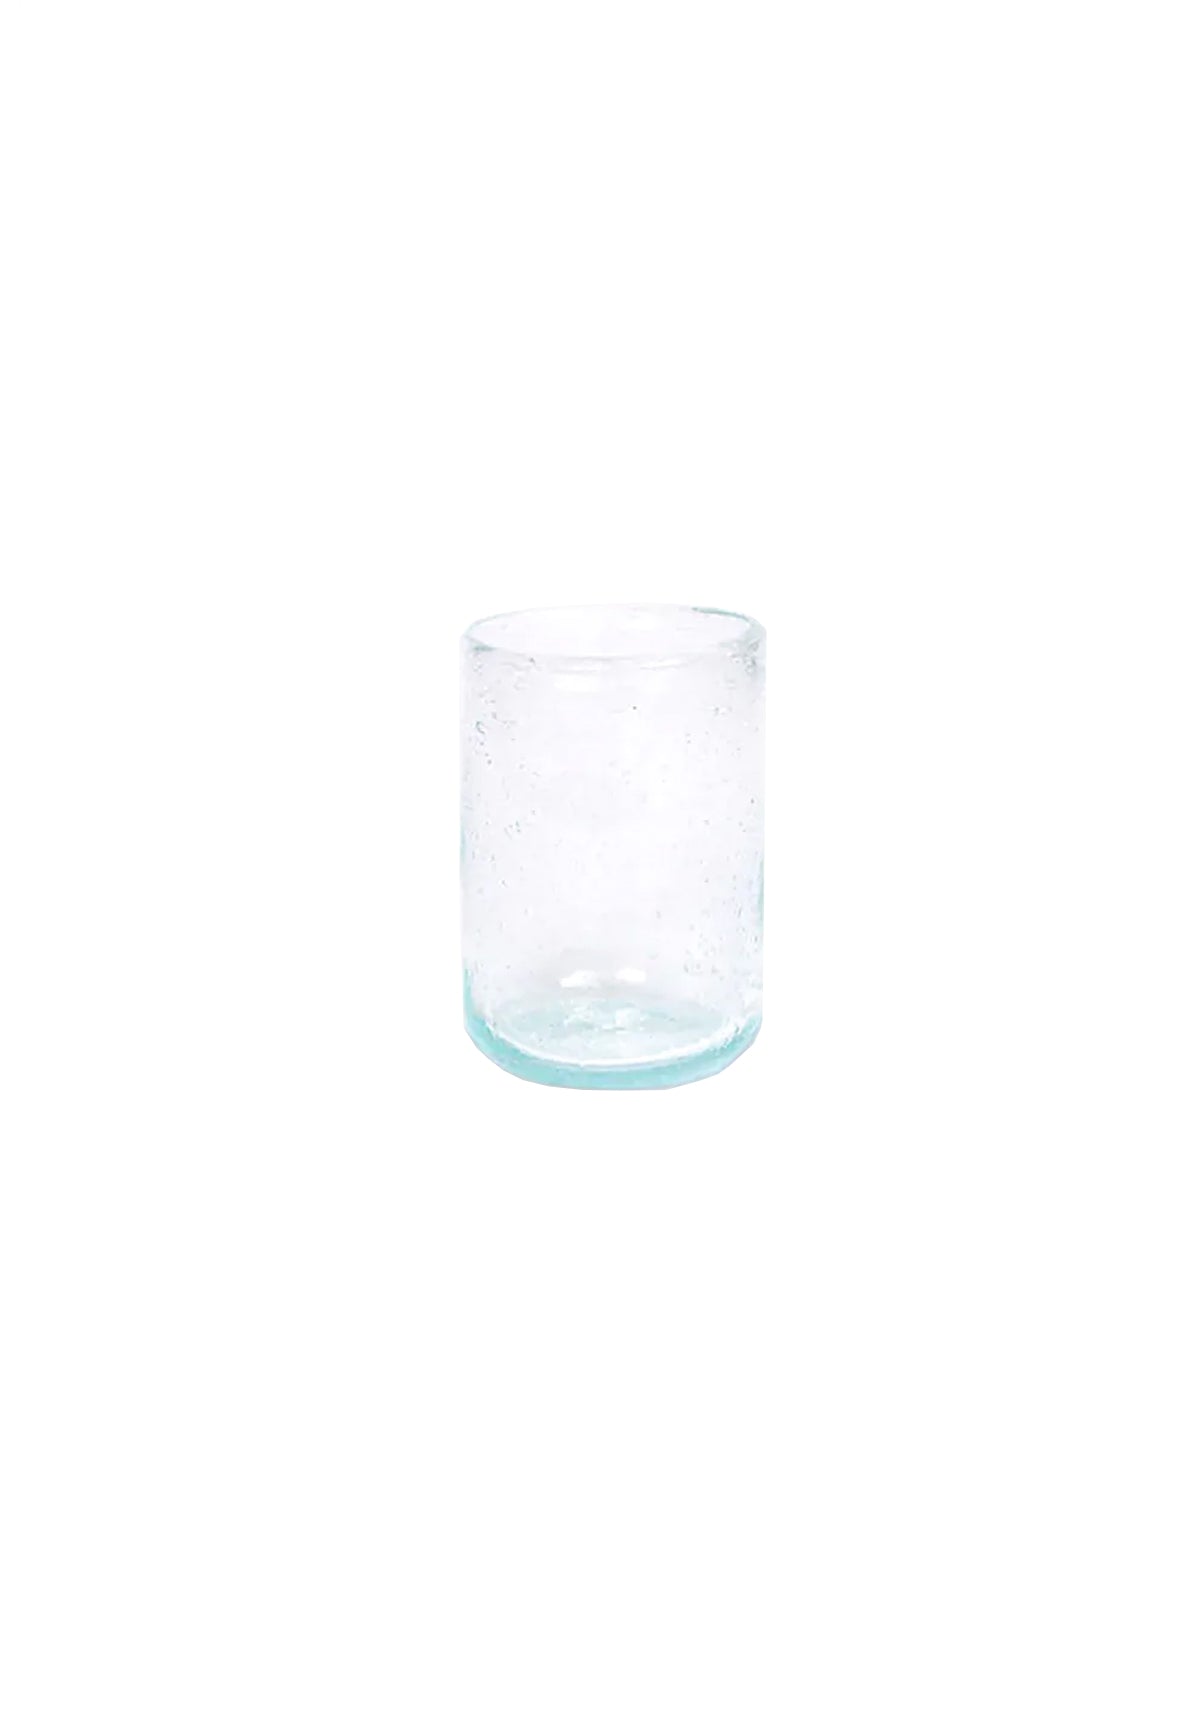 DRINKING GLASS SMALL WHITE